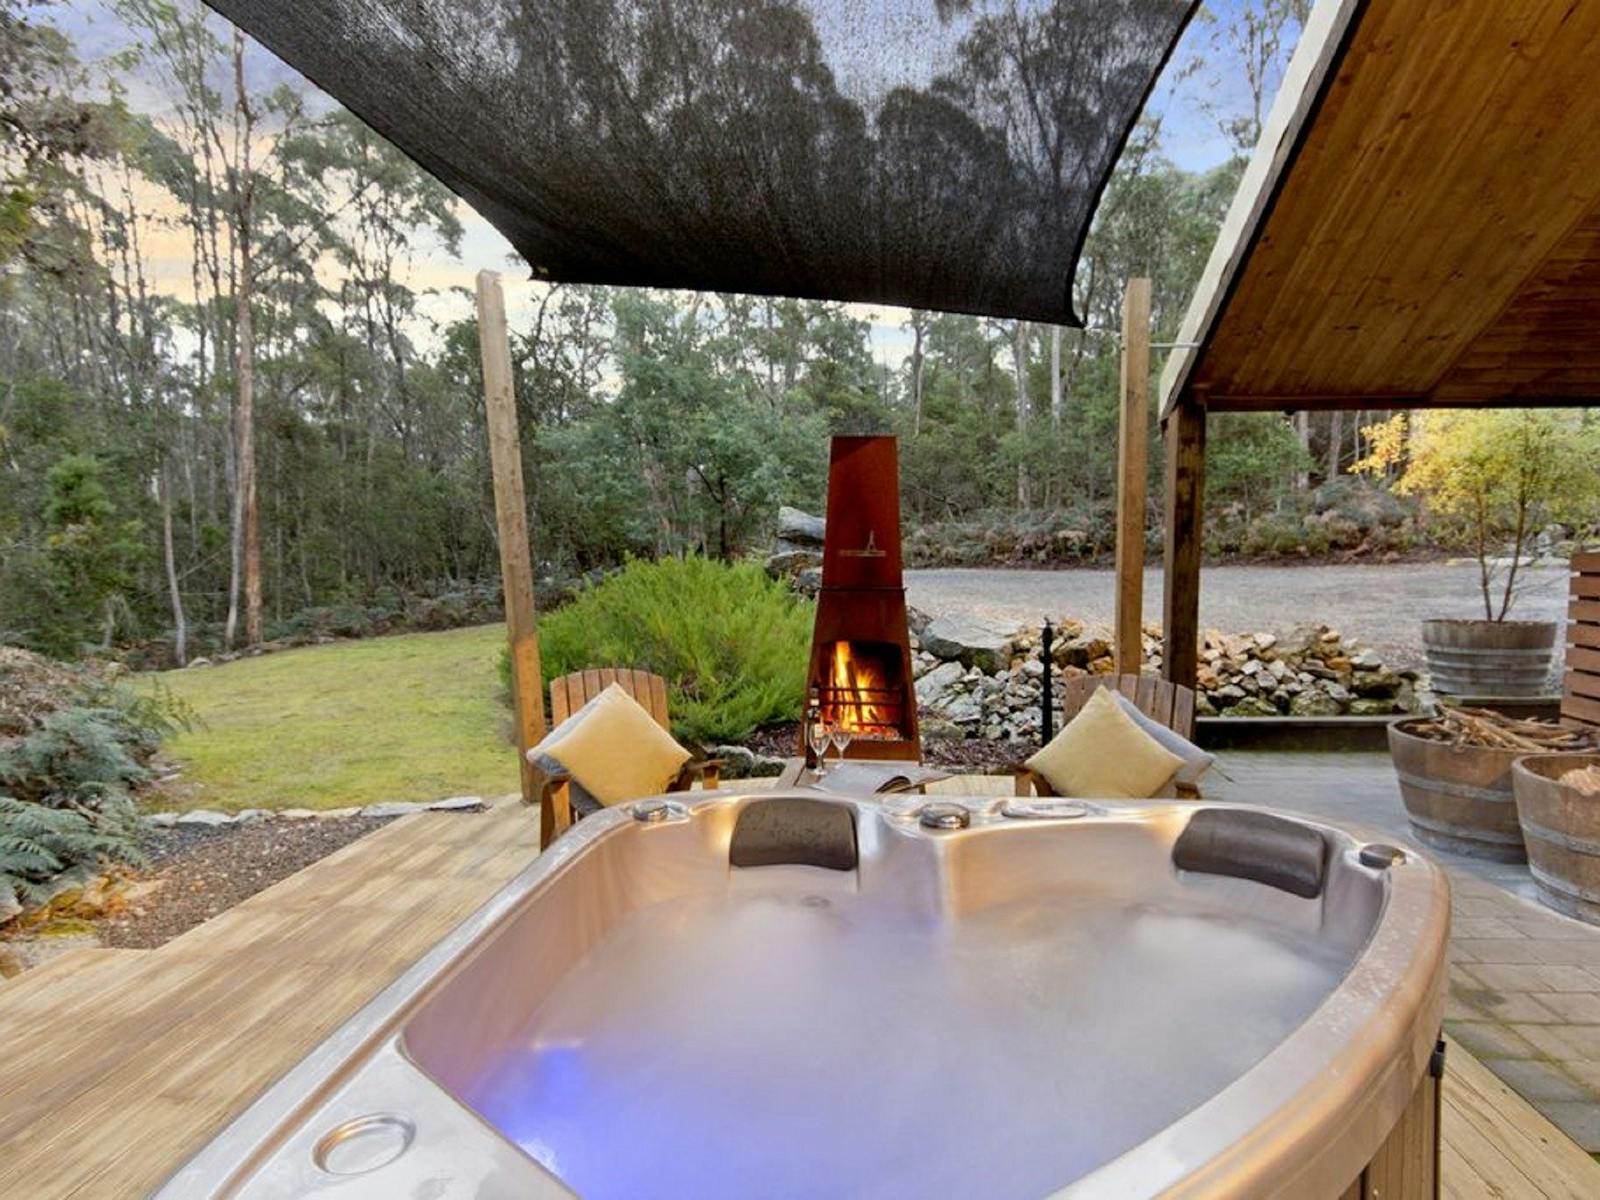 Hottub with outdoor wood fire